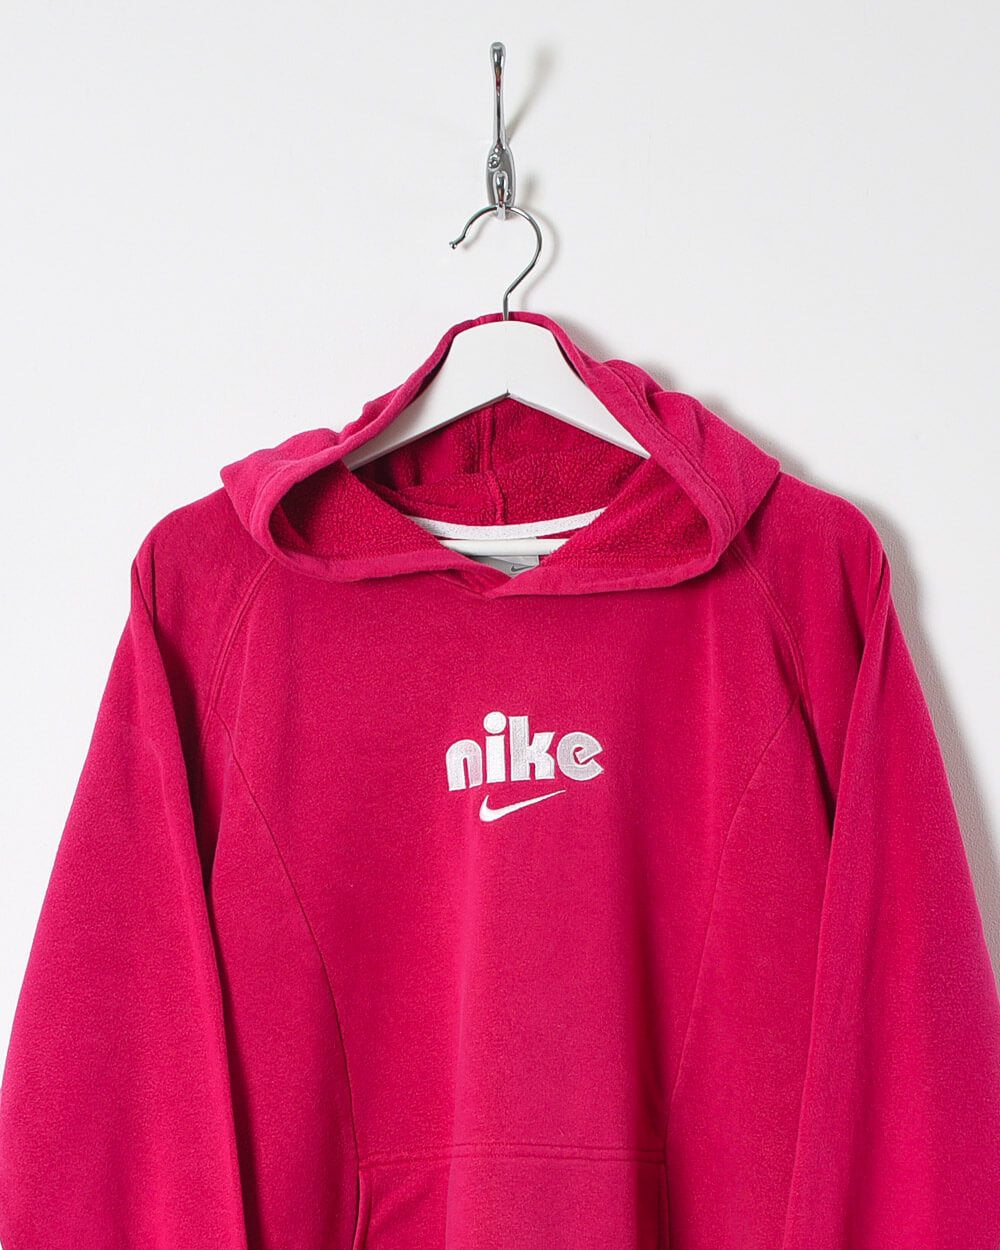 Nike Women's Hoodie - X-Large - Domno Vintage 90s, 80s, 00s Retro and Vintage Clothing 